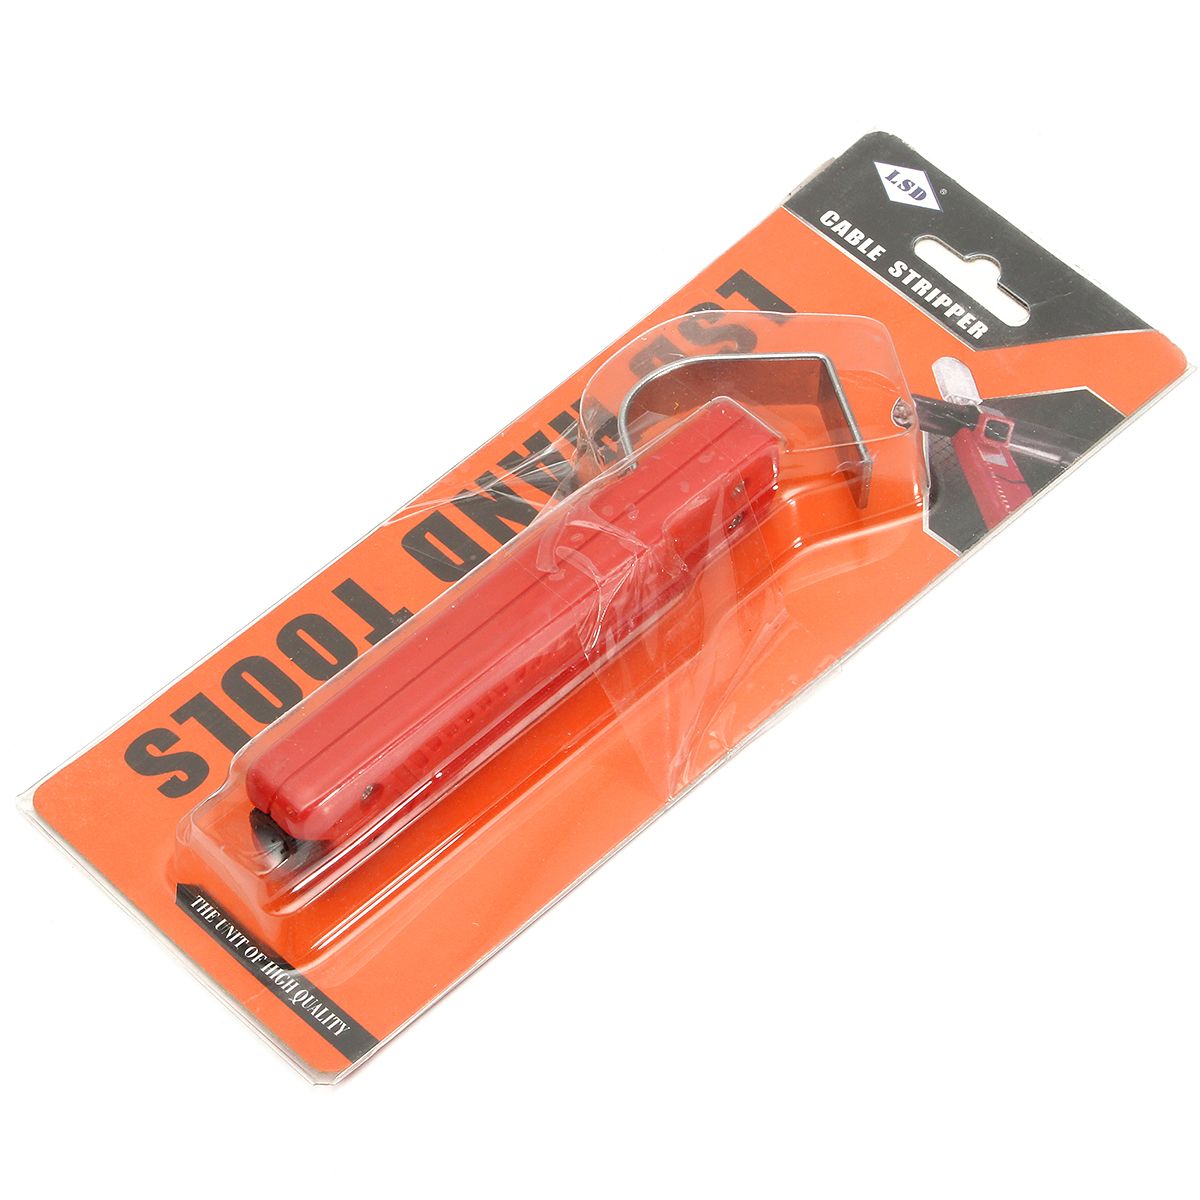 LY25-3-28-35mm-Wire-Stripper-Stripping-Cutter-Plier-Crimping-Tool-For-PVC-Rubber-Cable-1125757